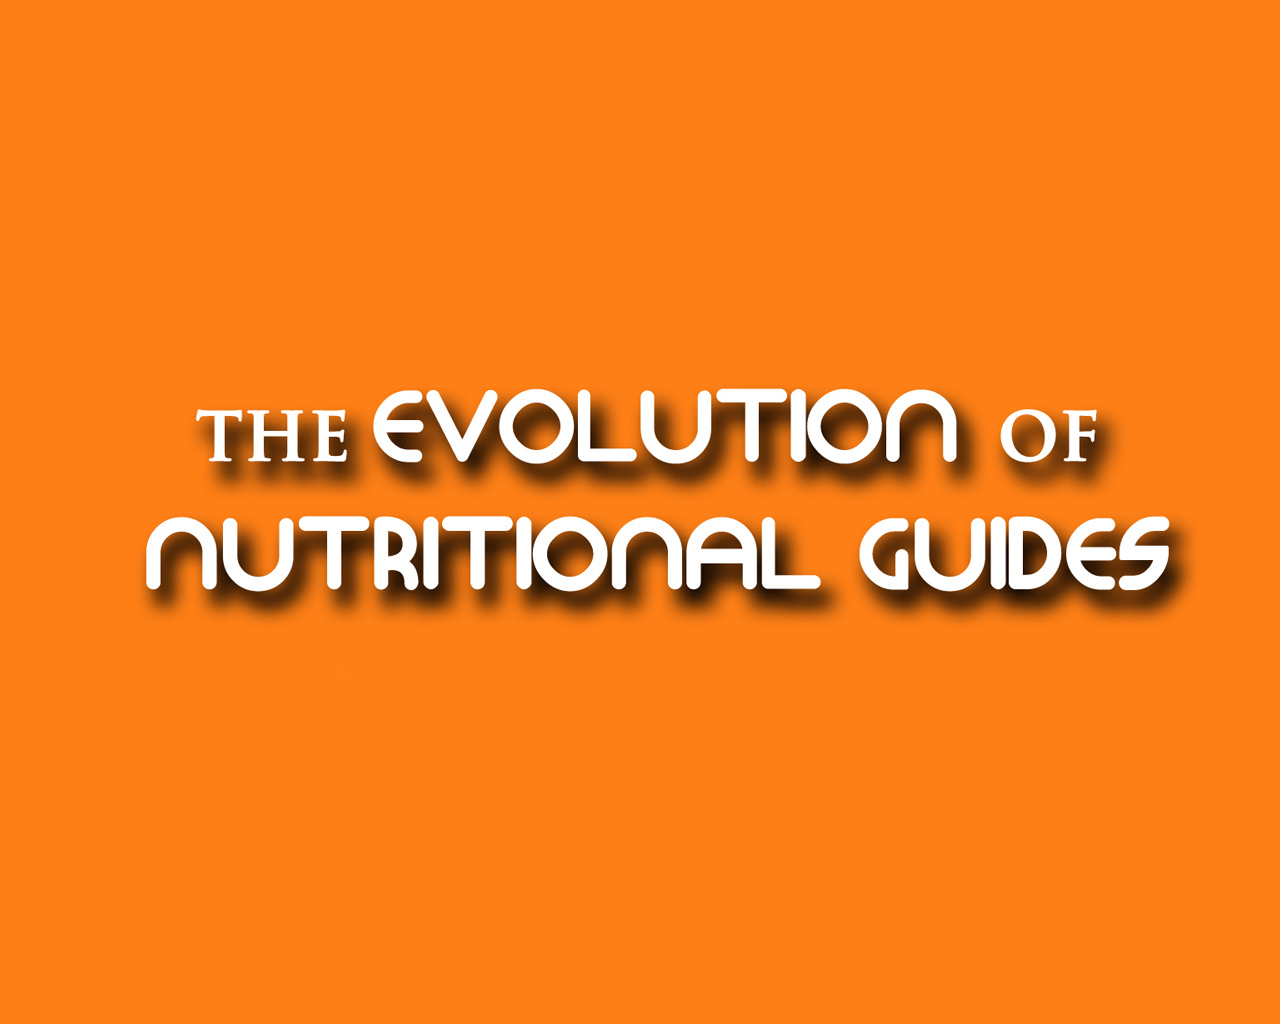 Graphic: The Evolution of Nutritional Guides. Graphic created by Anthony Huynh